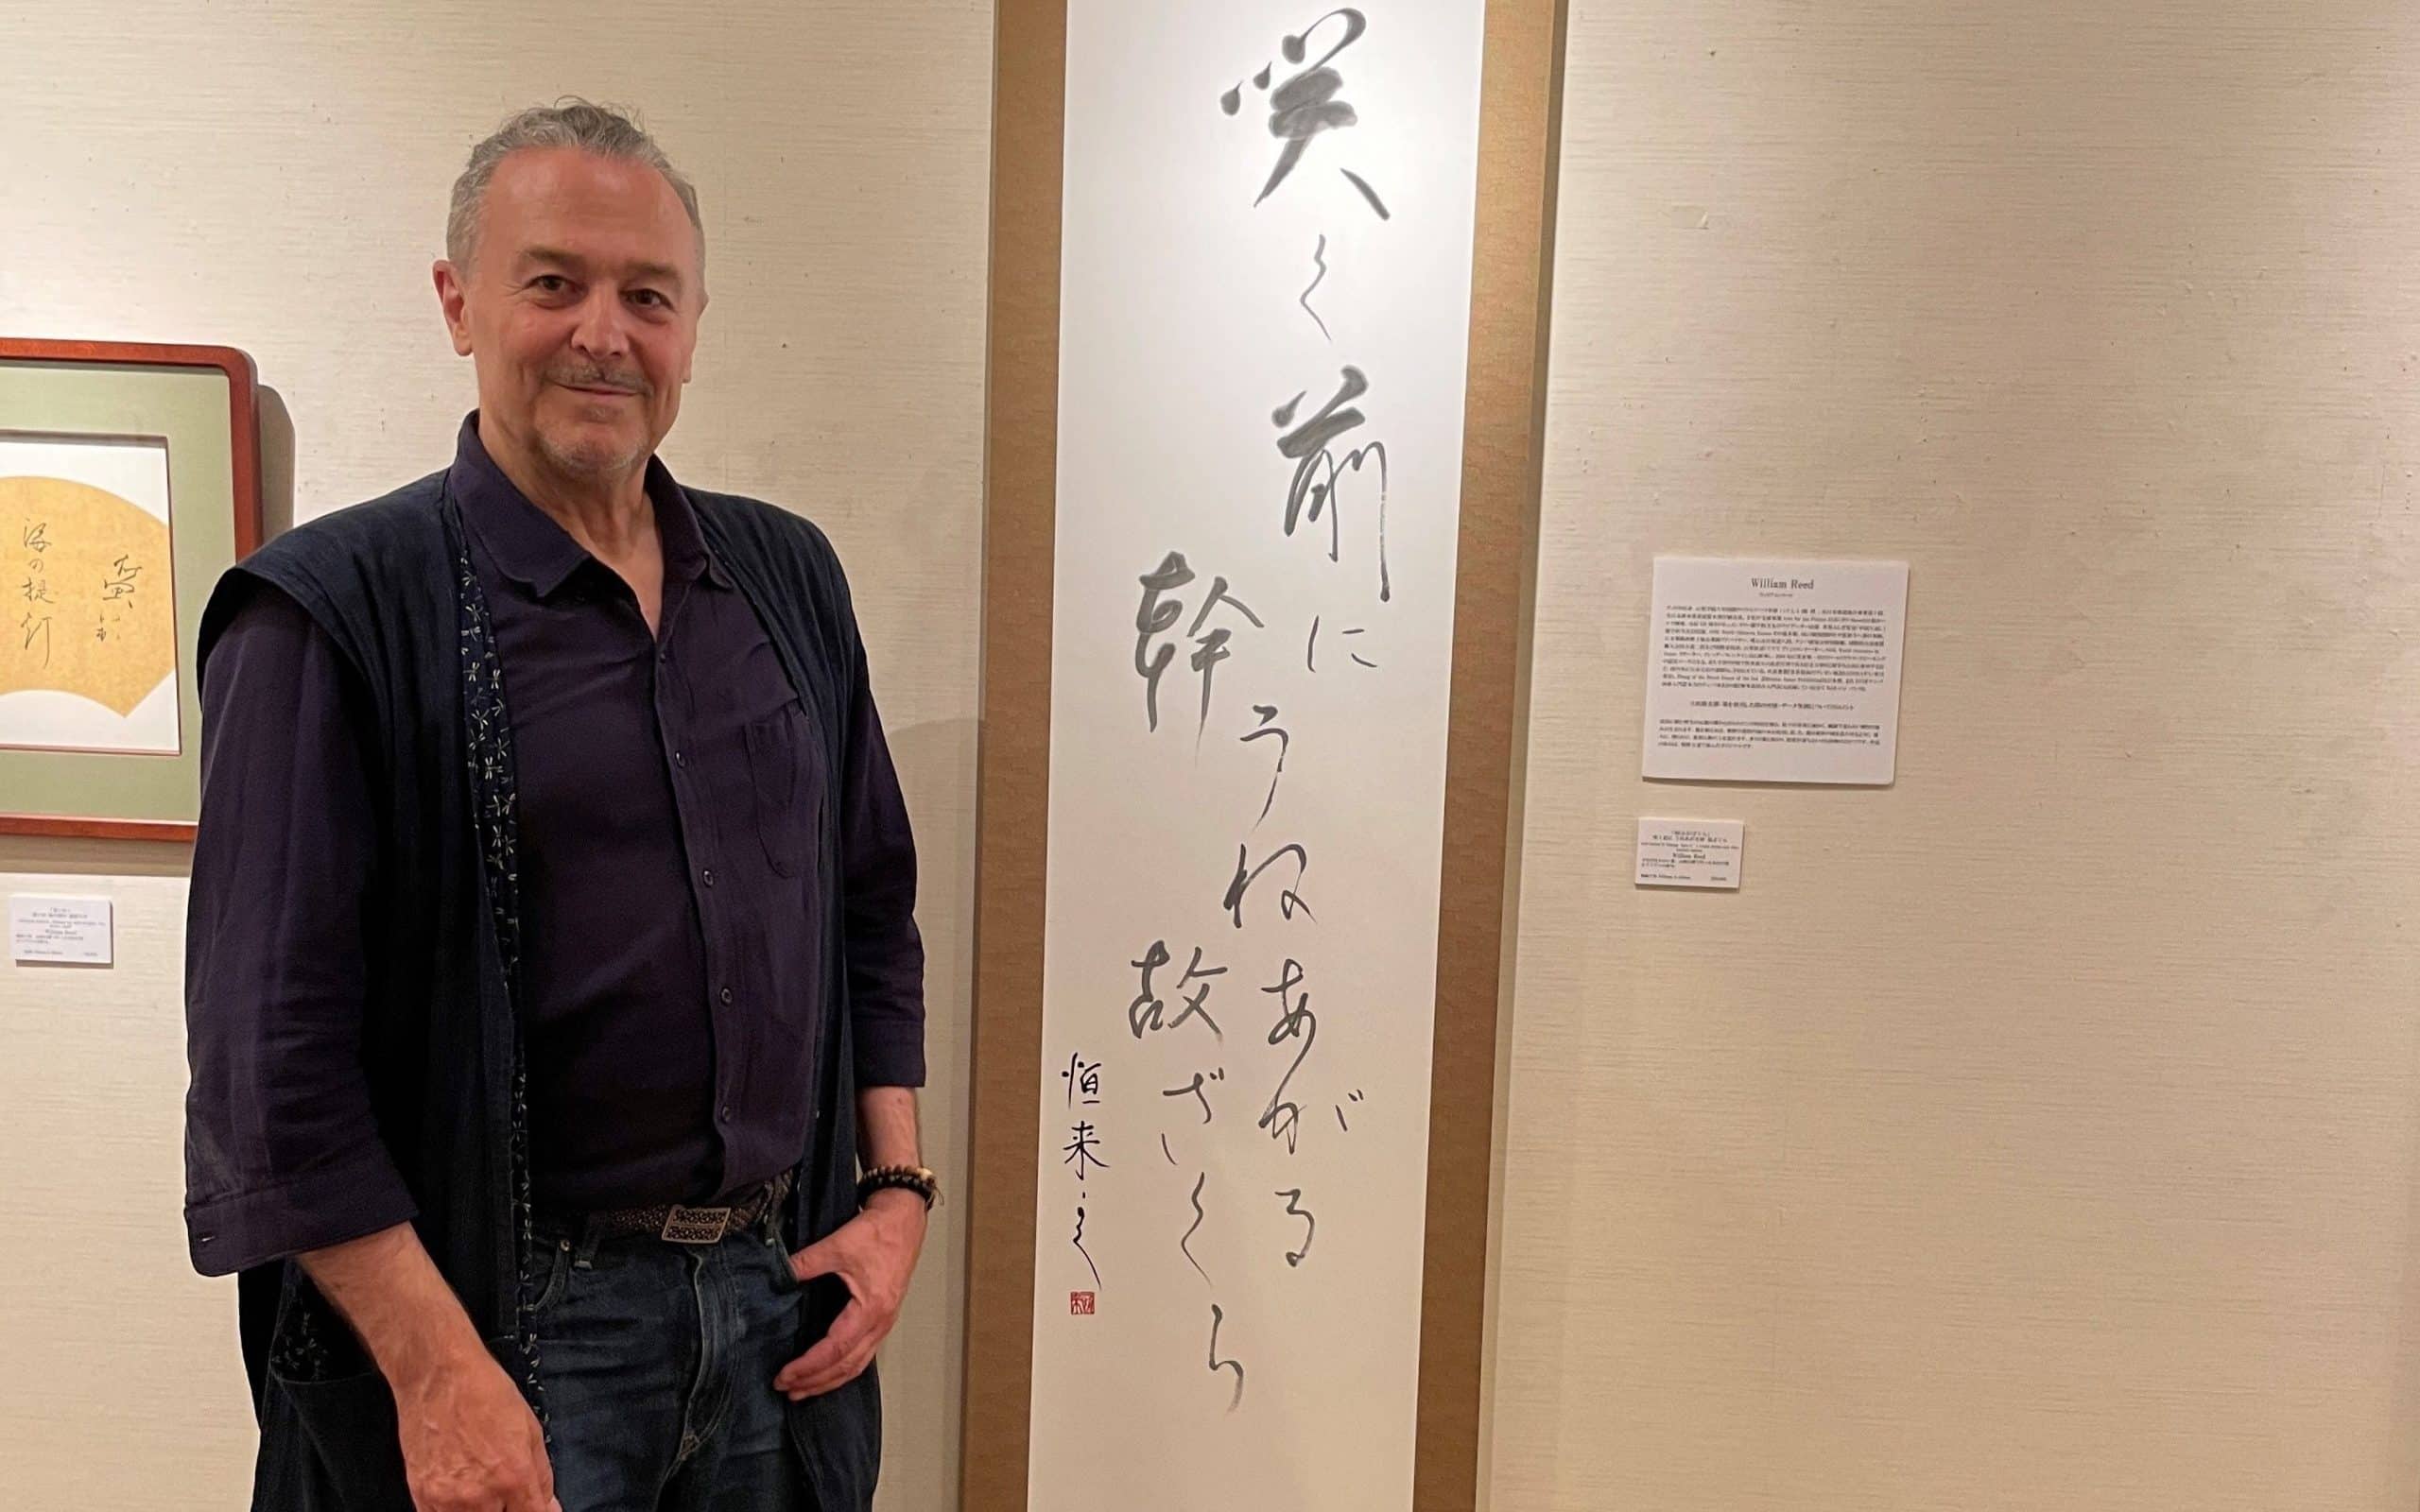 iCLA Professor William Reed stands beside his Japanese Calligraphy artwork 